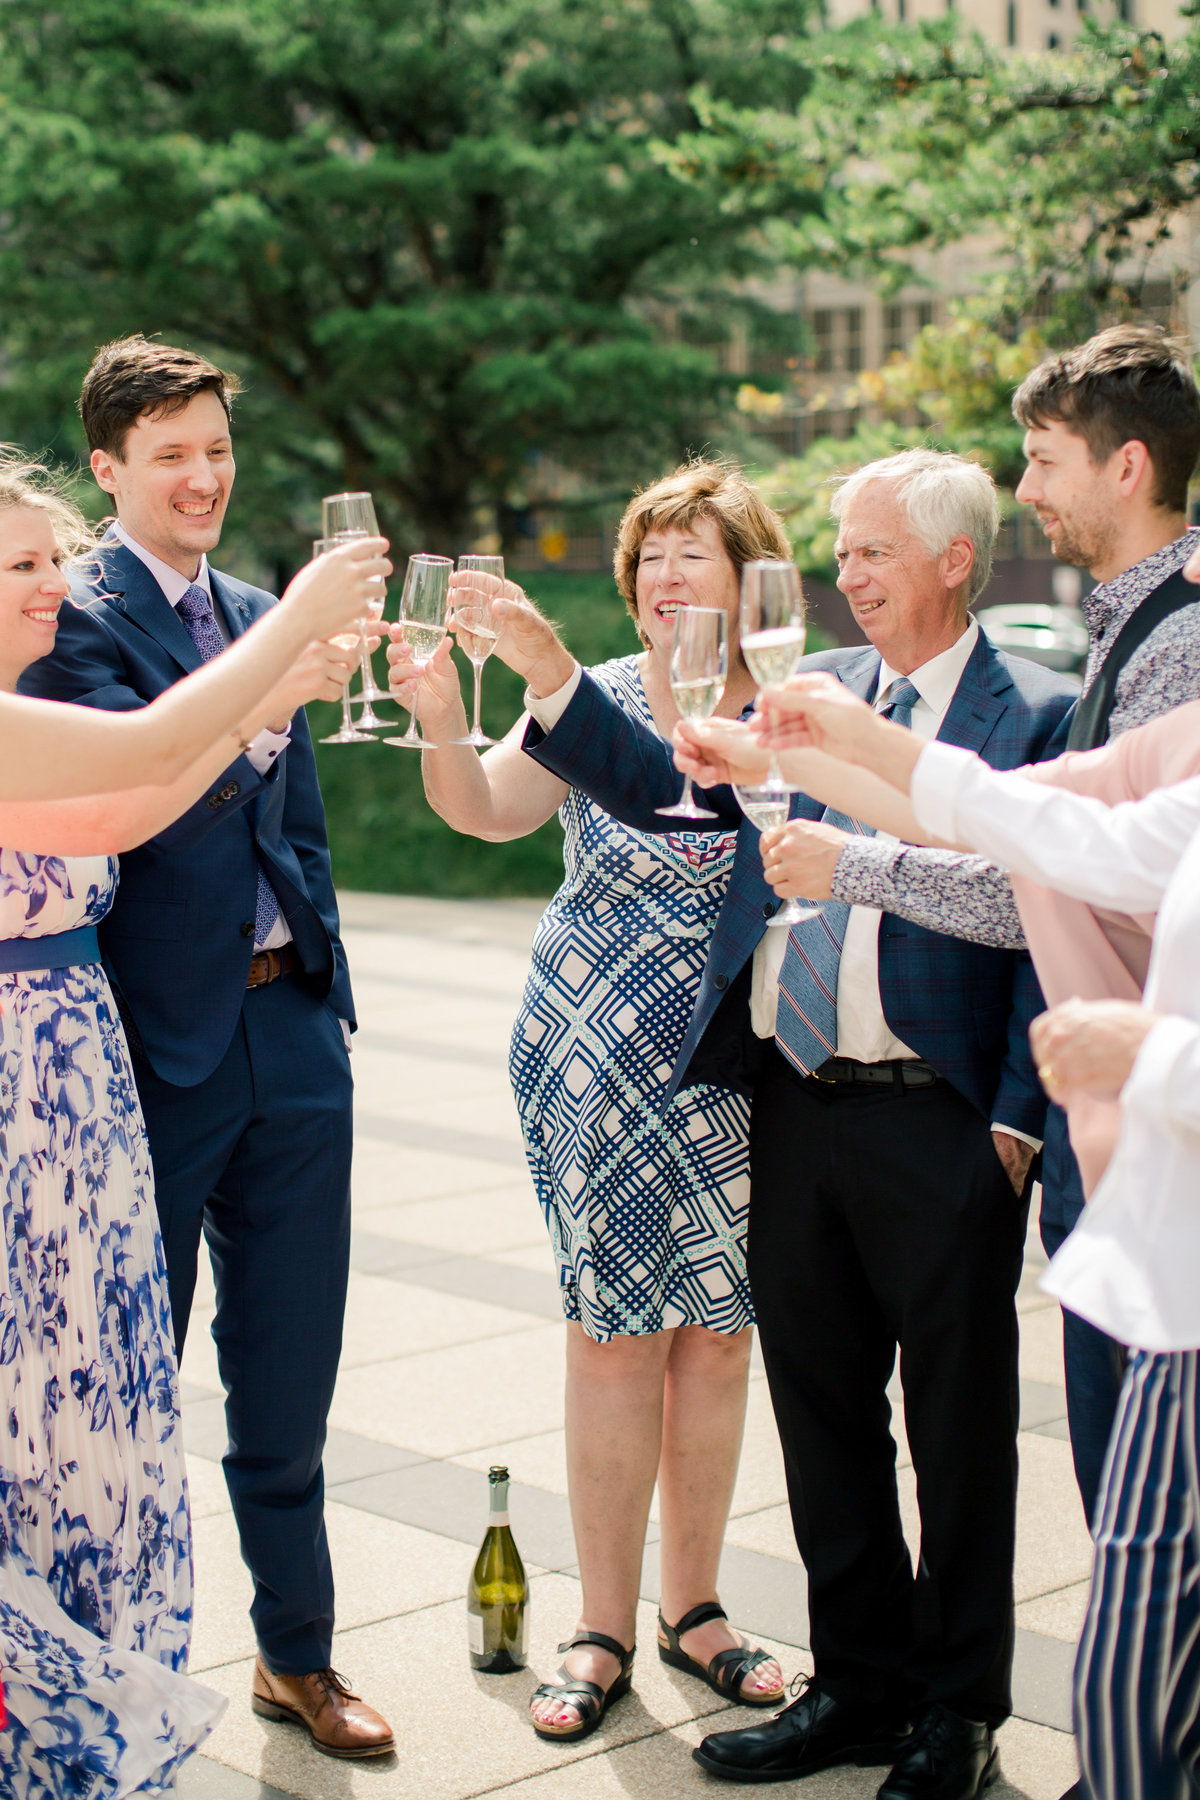 after elopement in downtown minneapolis immediate family cheers with bubbly outside